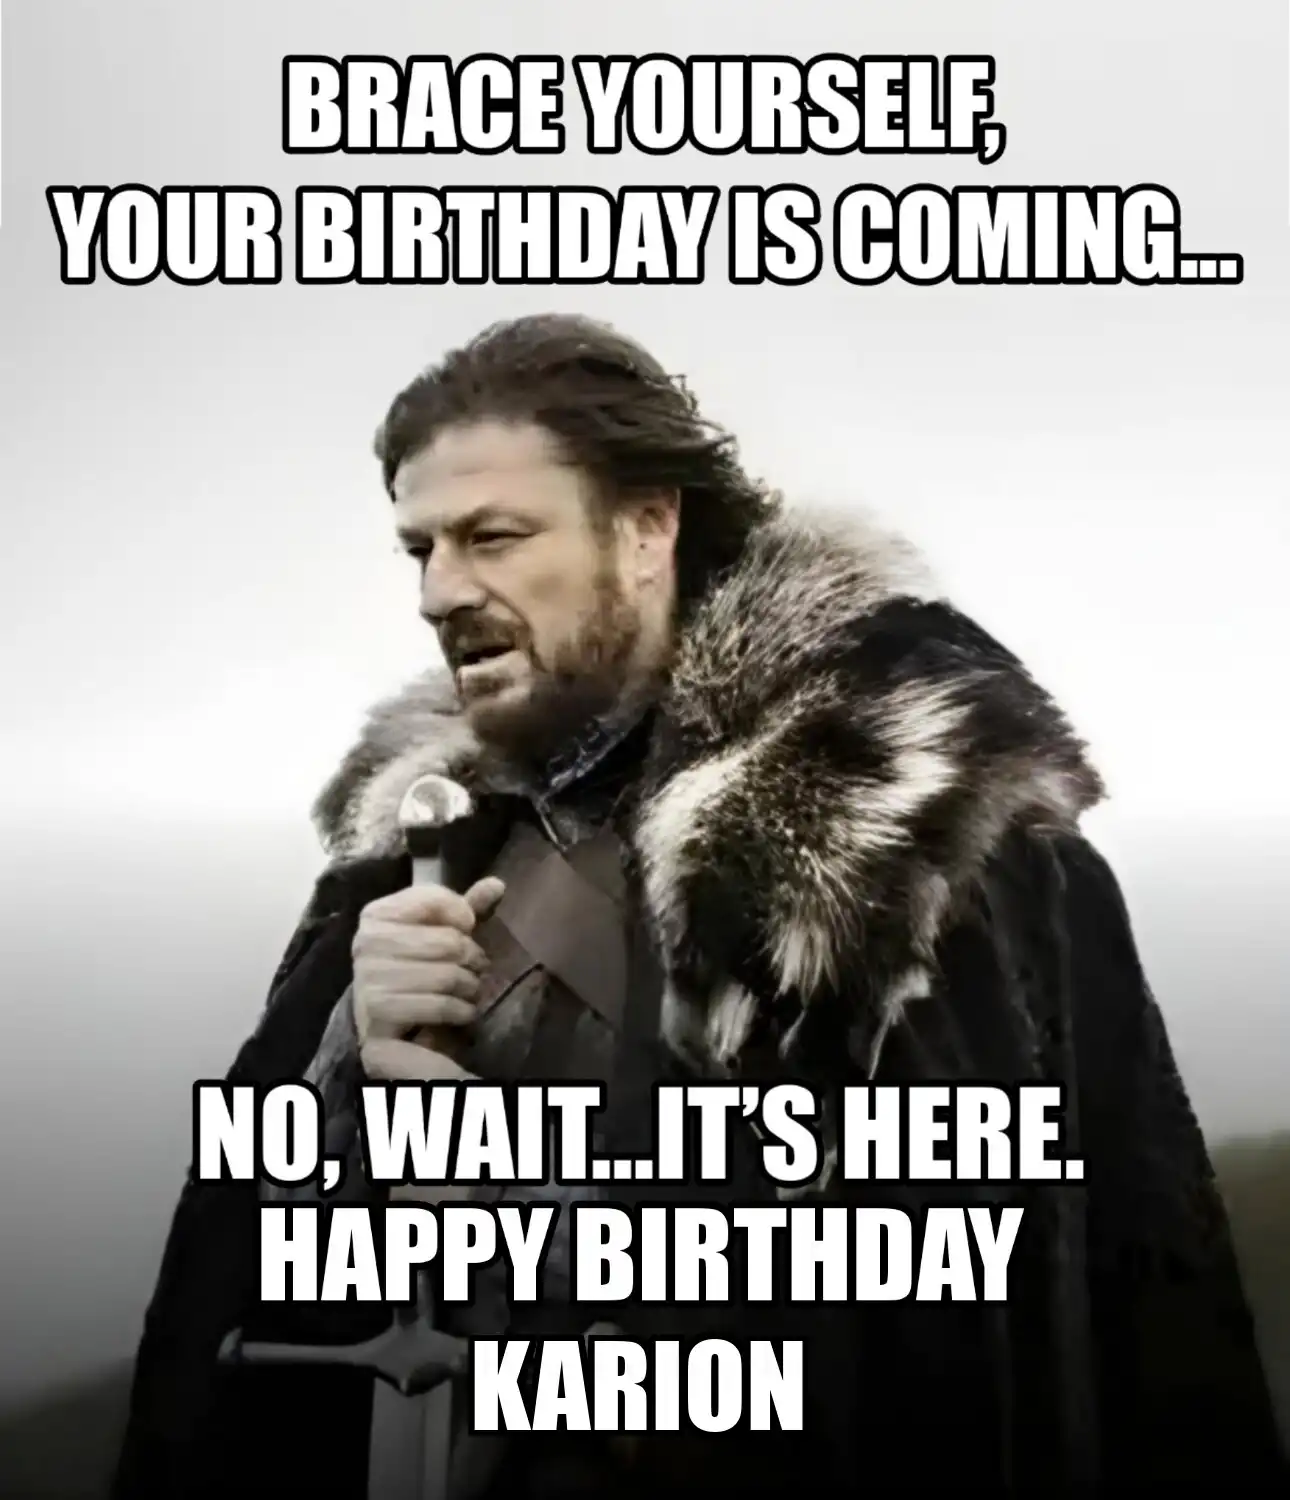 Happy Birthday Karion Brace Yourself Your Birthday Is Coming Meme